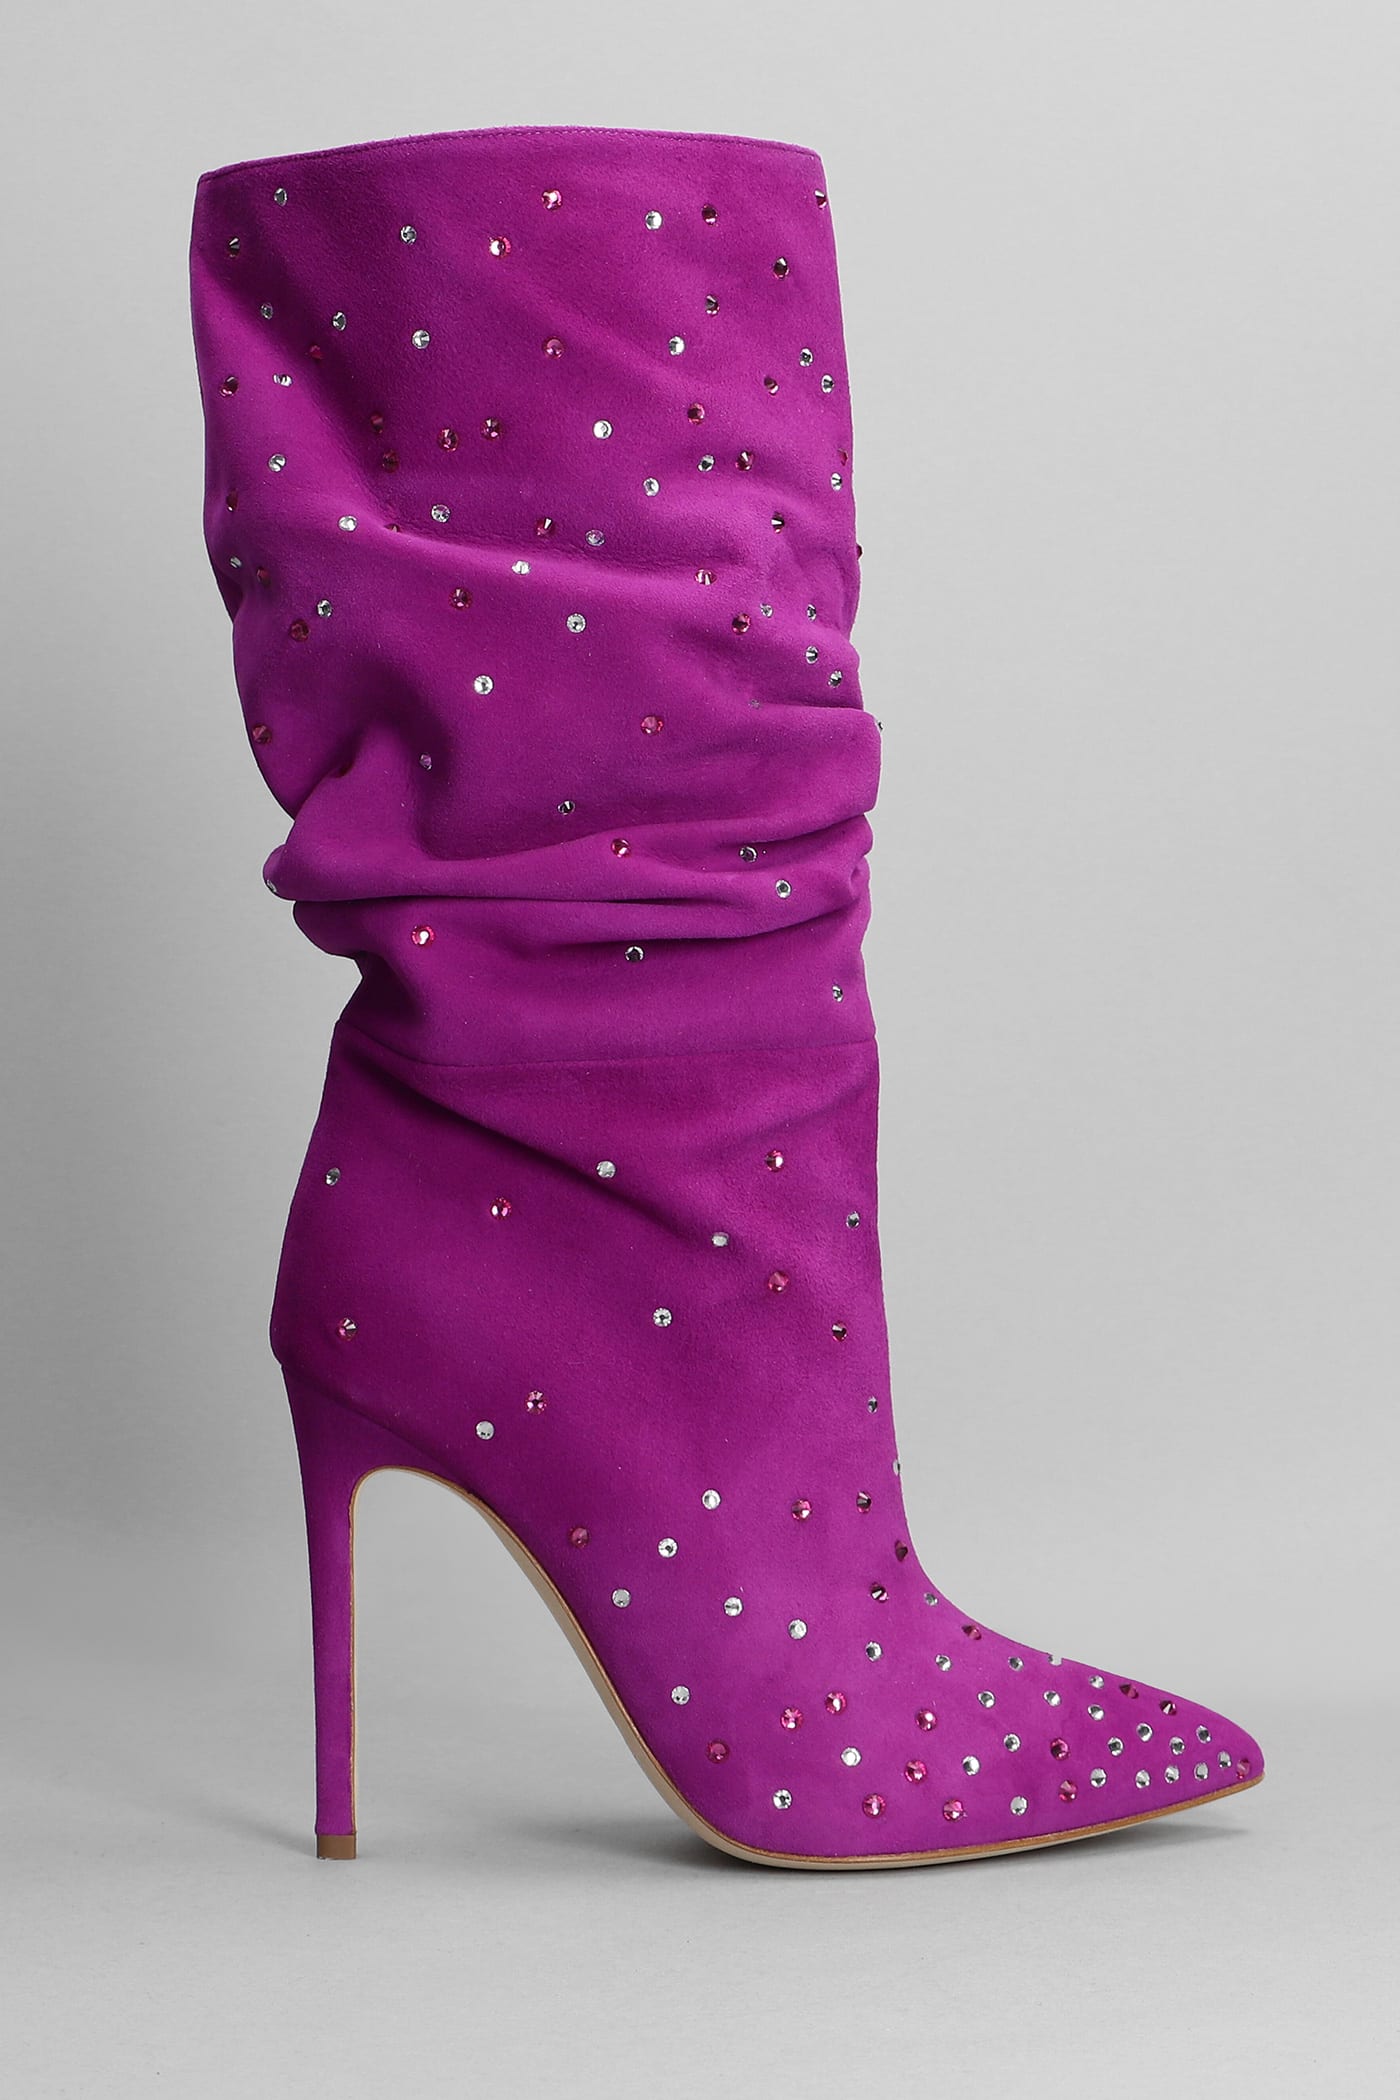 Paris Texas Holly High Heels Ankle Boots In Rose-pink Suede